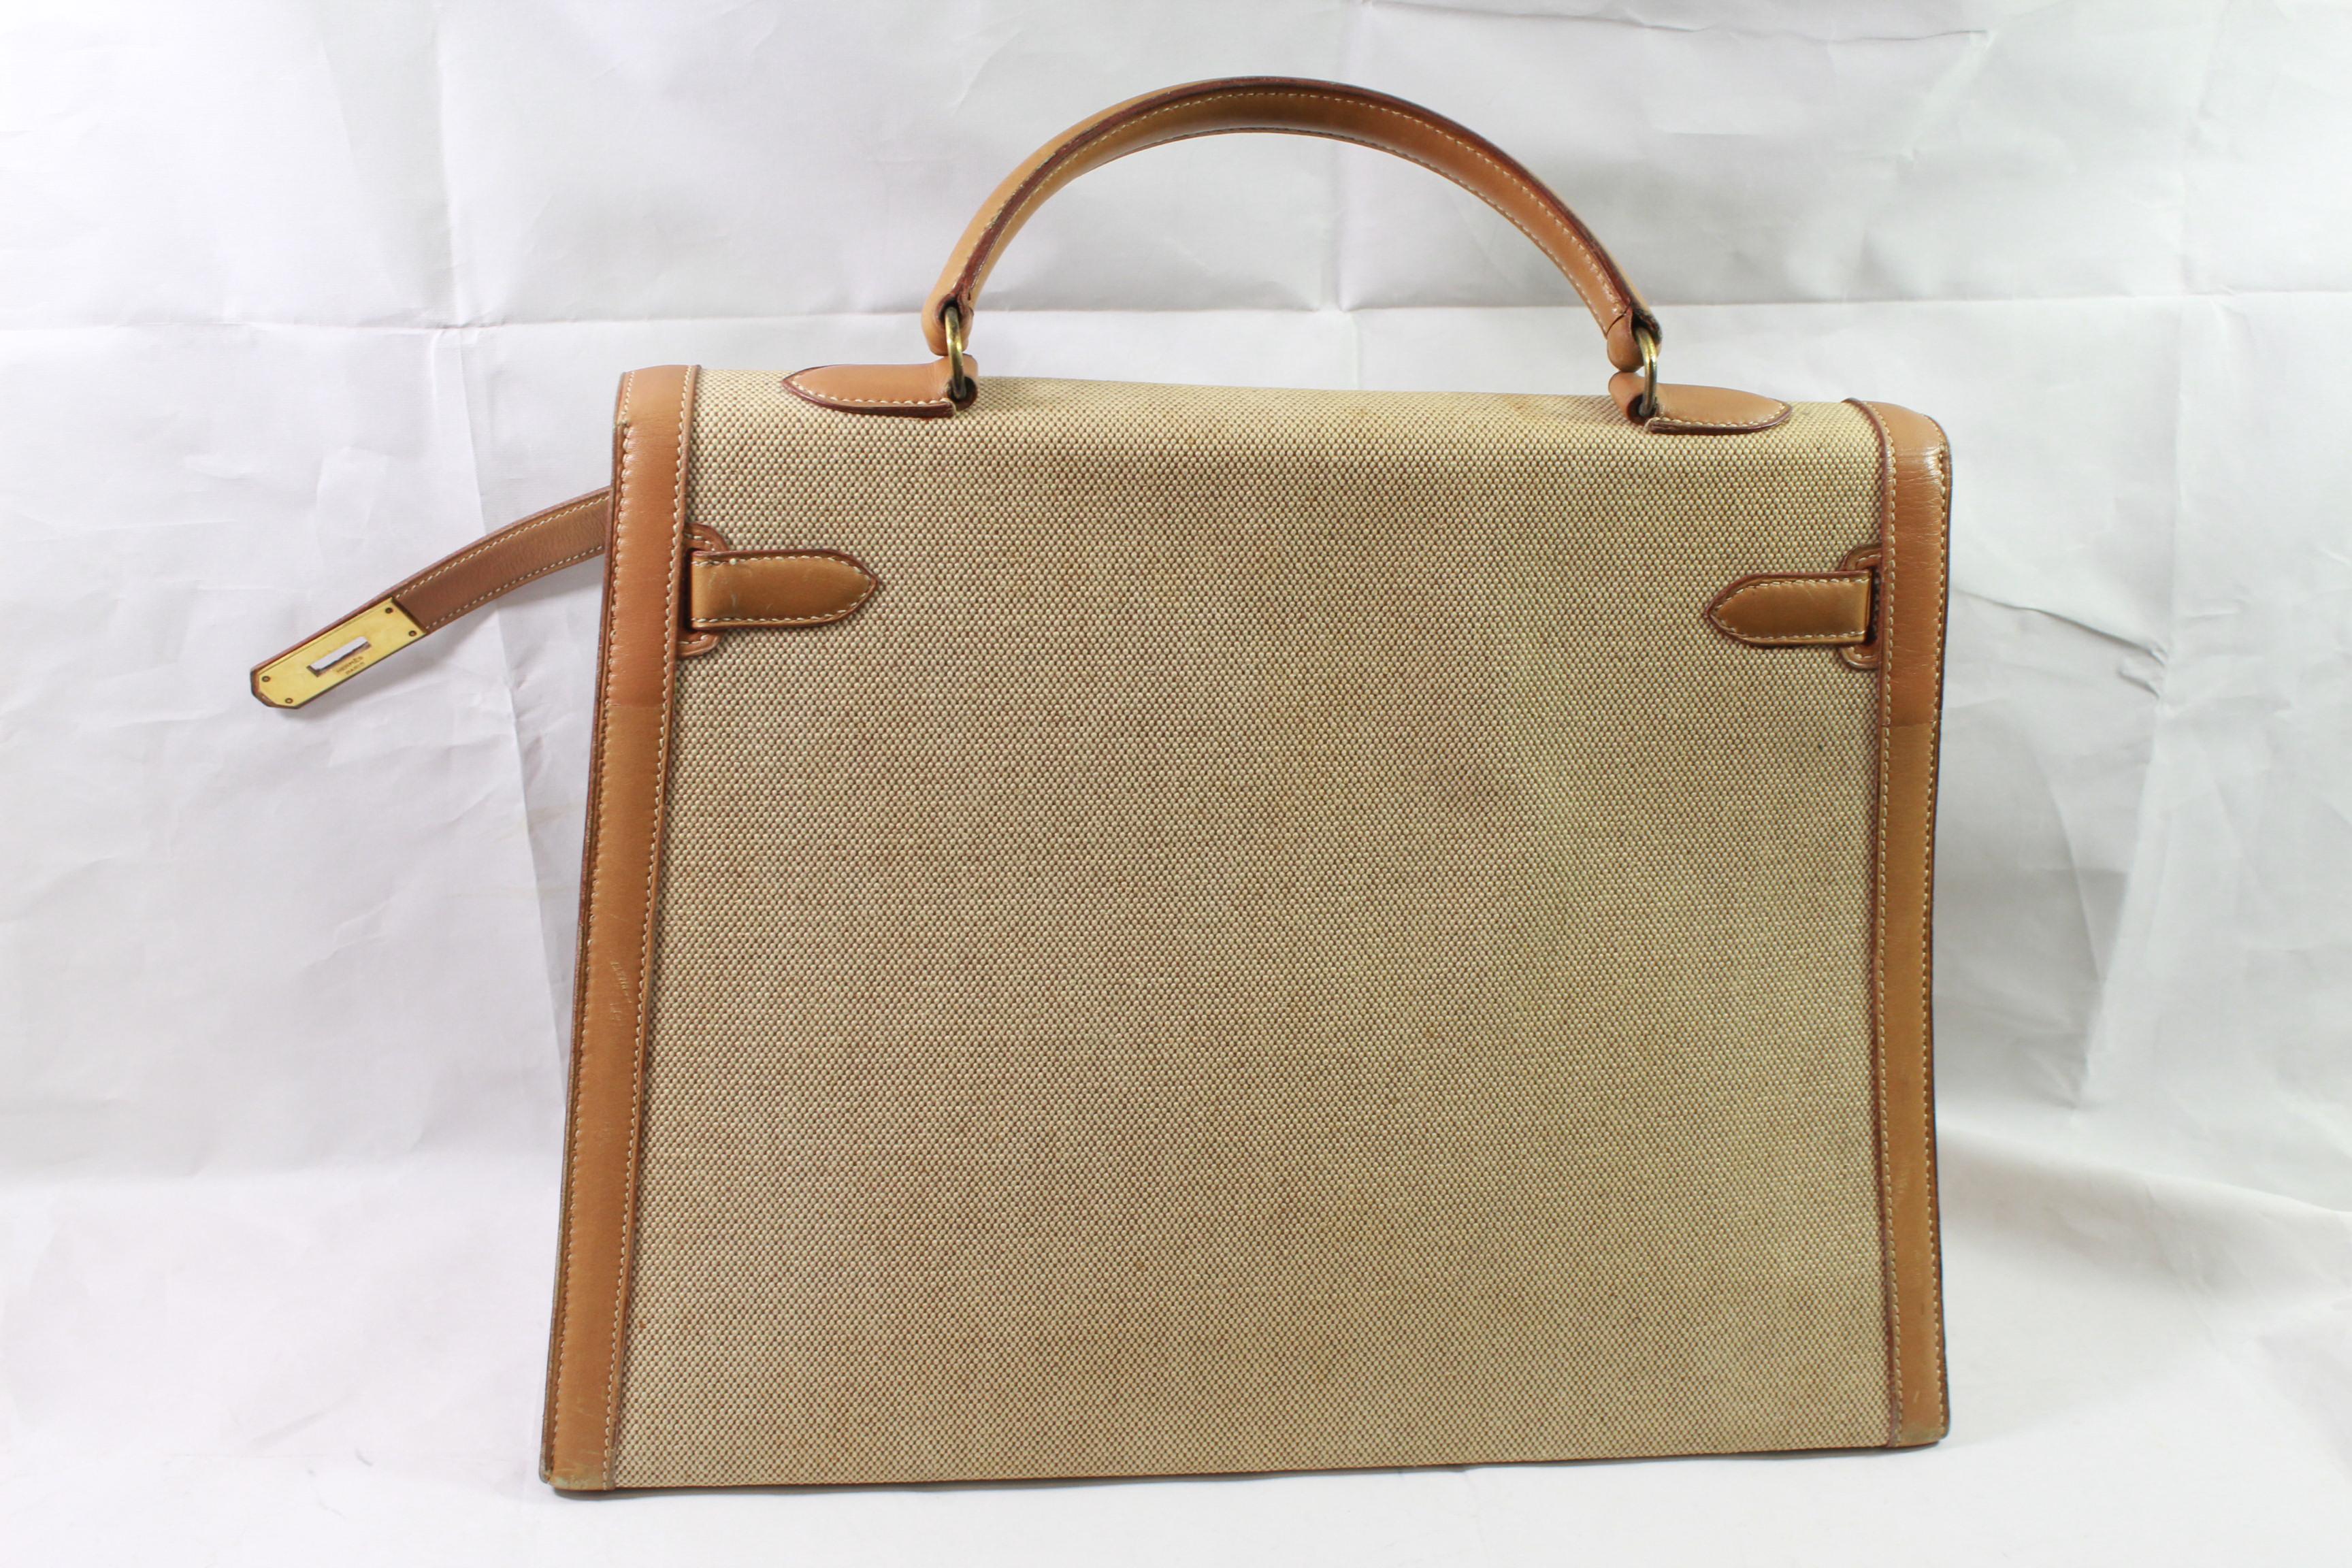 Viintage Hermes Kelly 35 in Brown Leather and Canvas. Fair condition 5